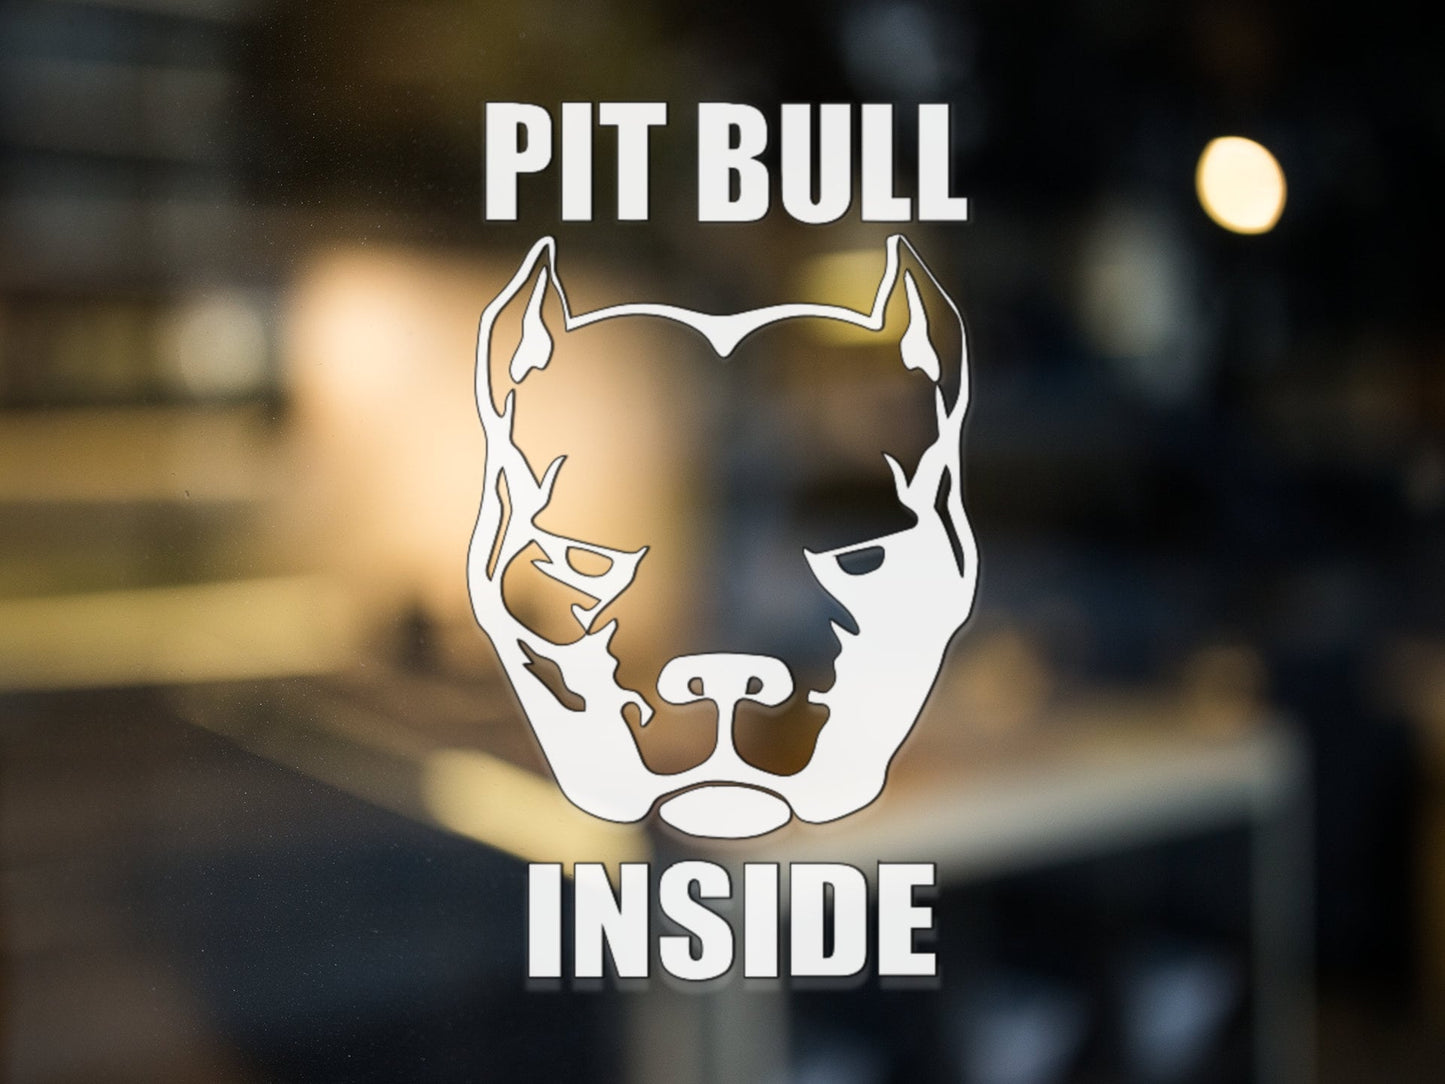 Pitbull Inside Decal - Many Colors & Sizes